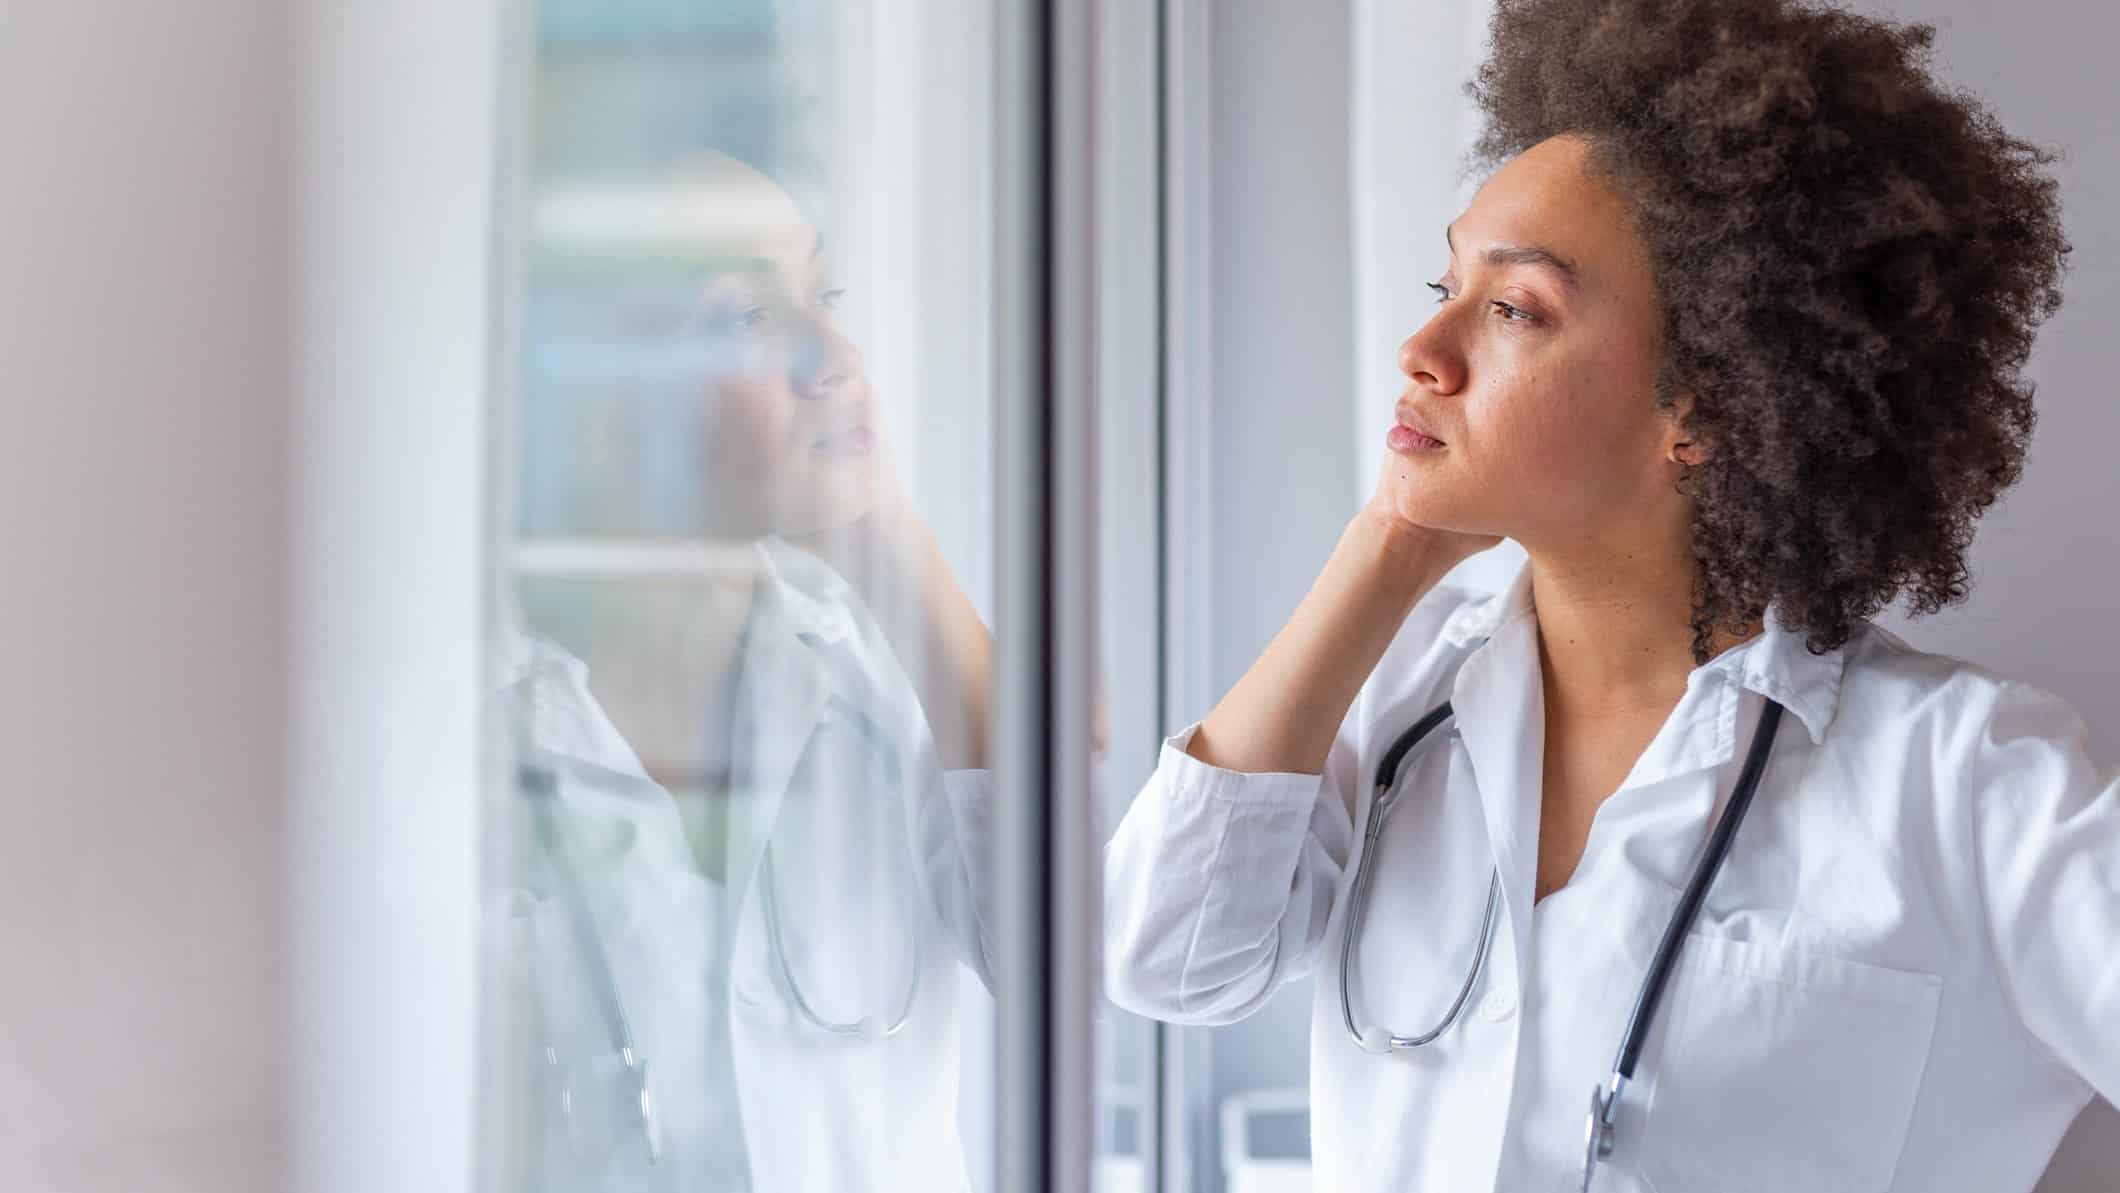 a doctor wearing a white coat with a stethoscope around her neck stares out a window with her hand to the side of her face as though in deep thought.